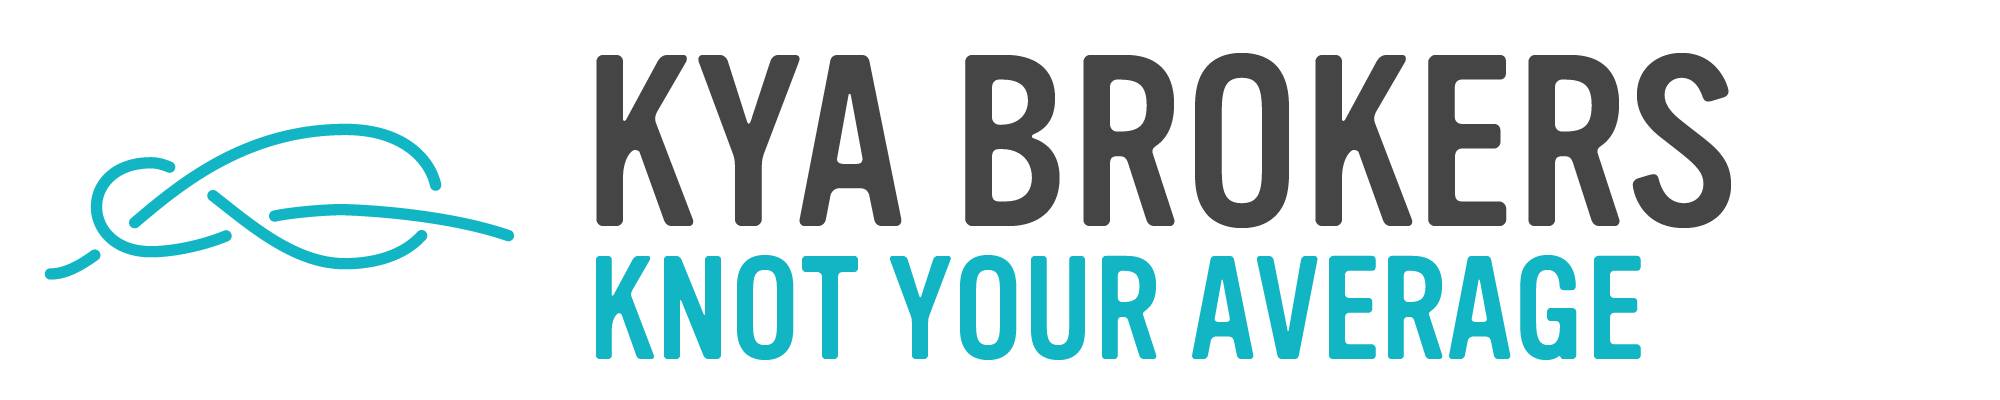 KYA BROKERS | Knot Your Average Yacht Brokers